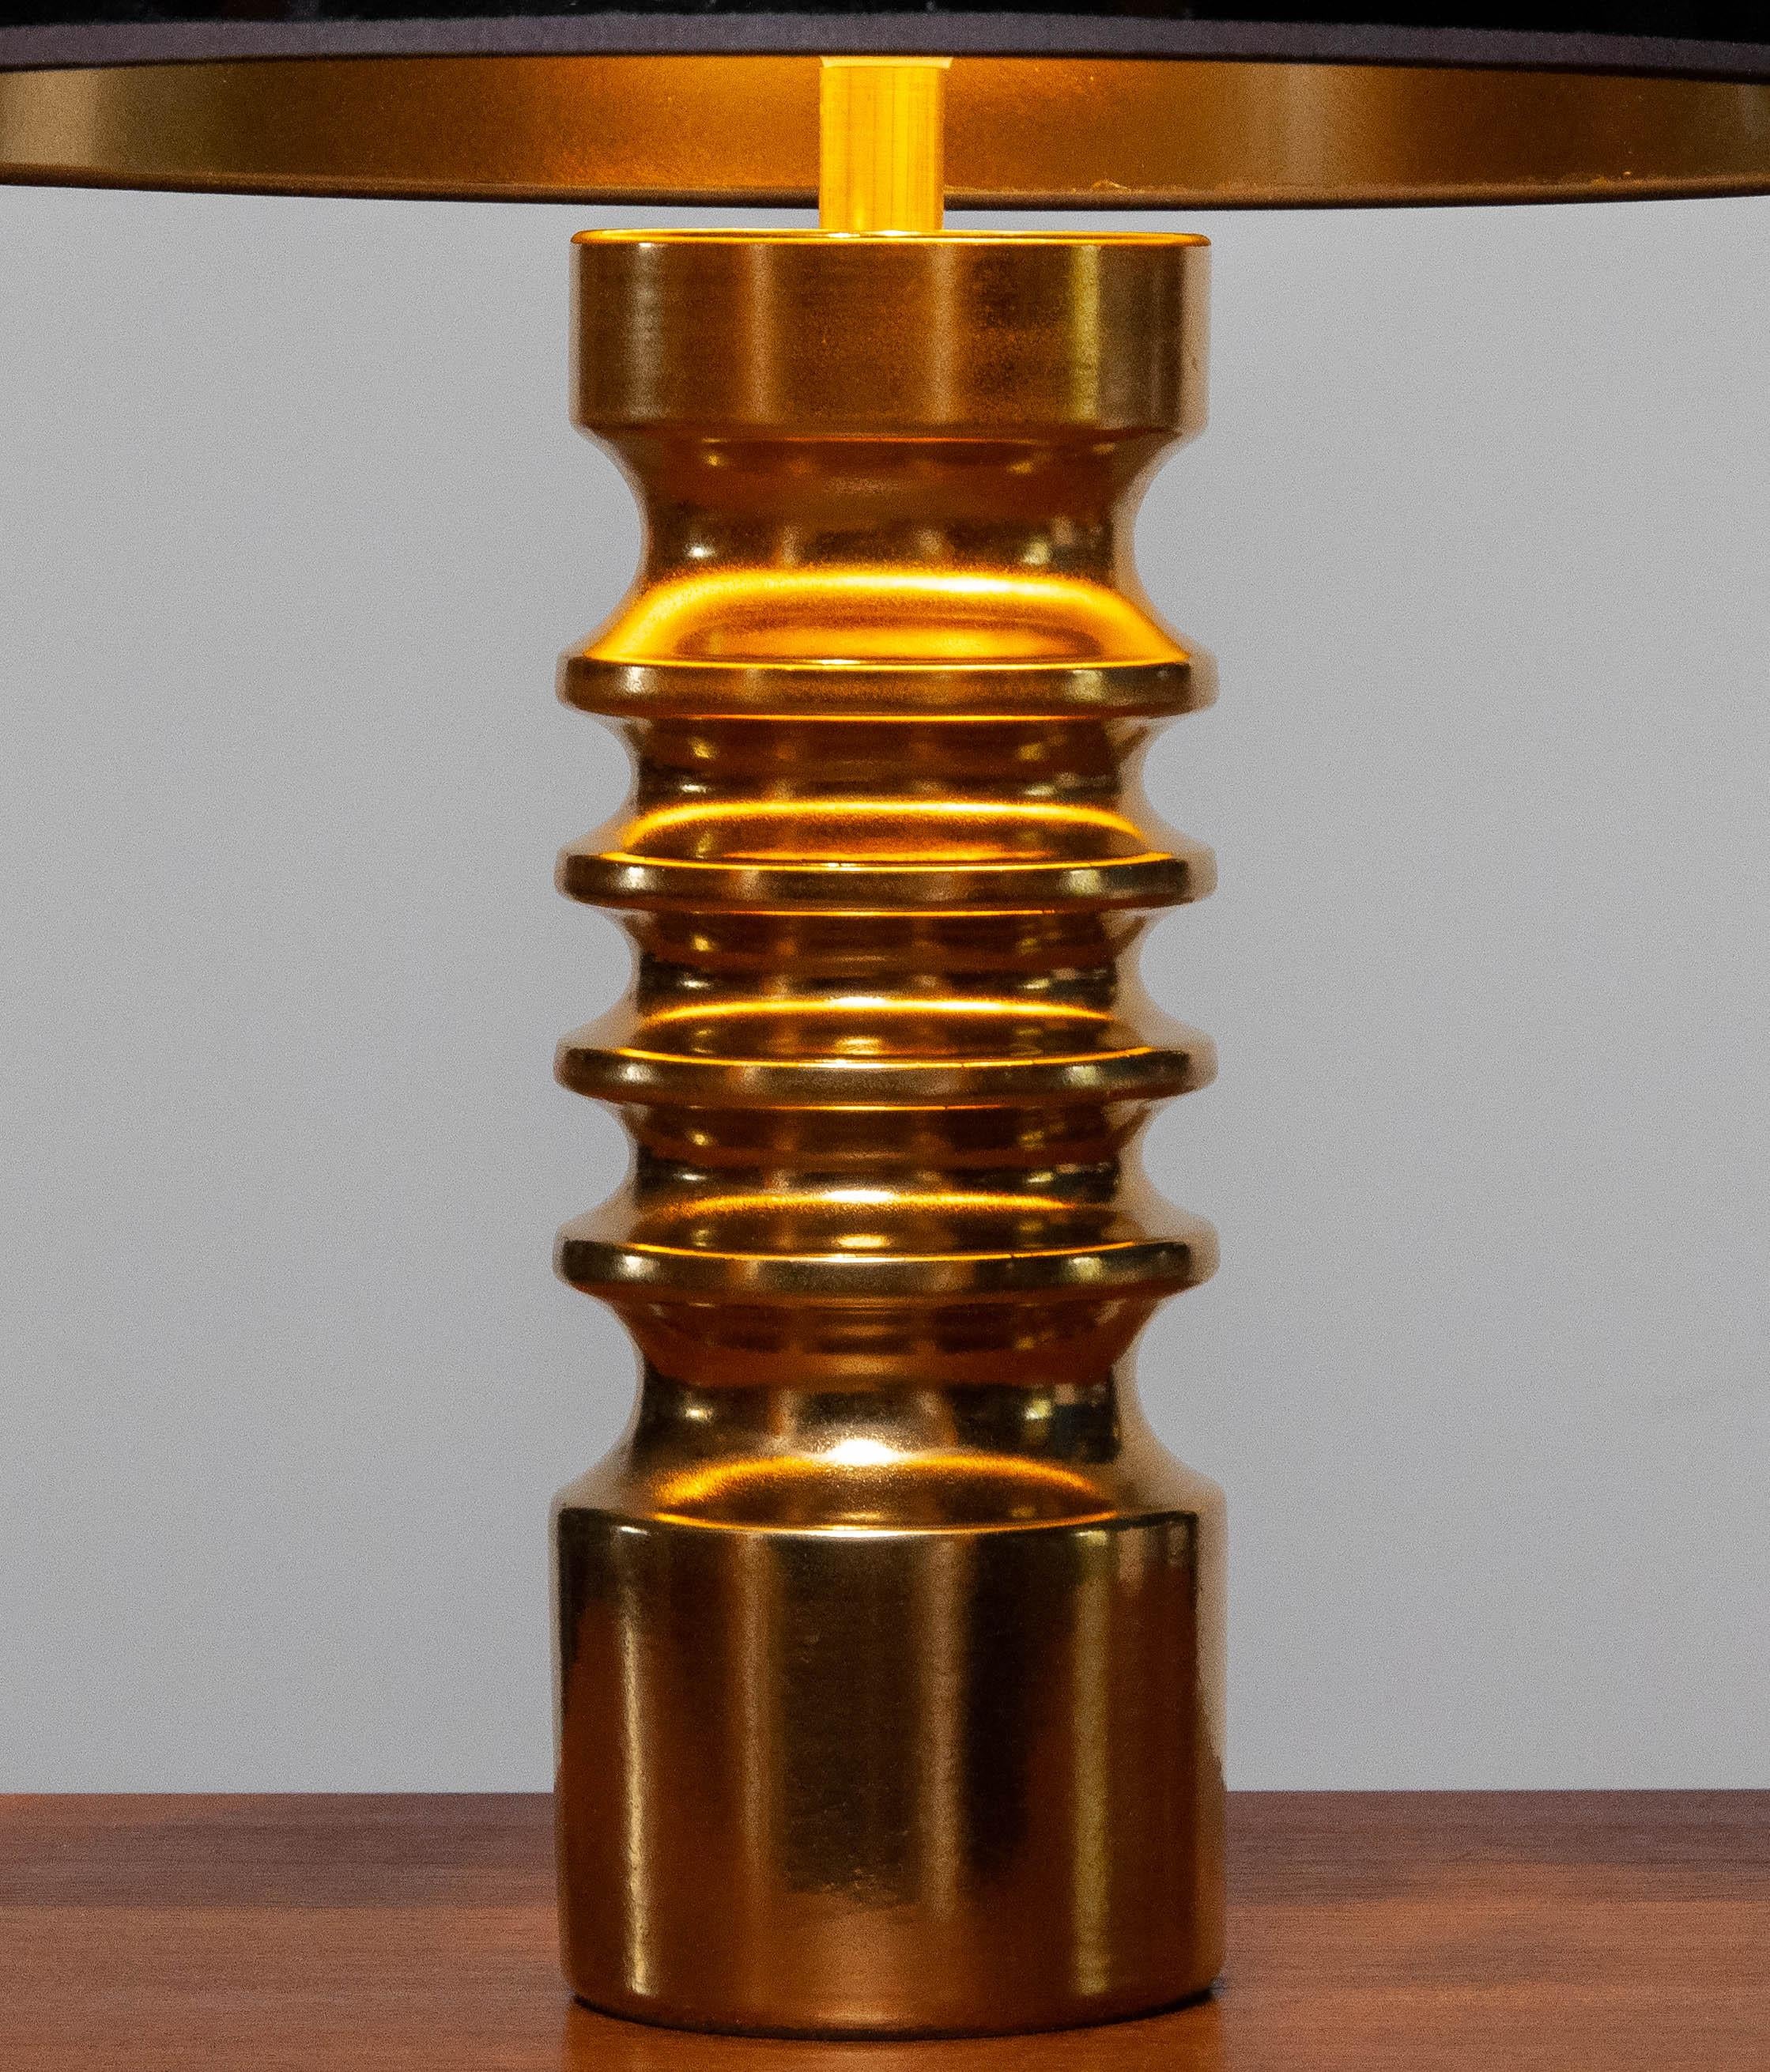 1970s Gilt Ceramic Table Lamp in Brutalist Style by Dümler and Breiden Germany In Good Condition For Sale In Silvolde, Gelderland